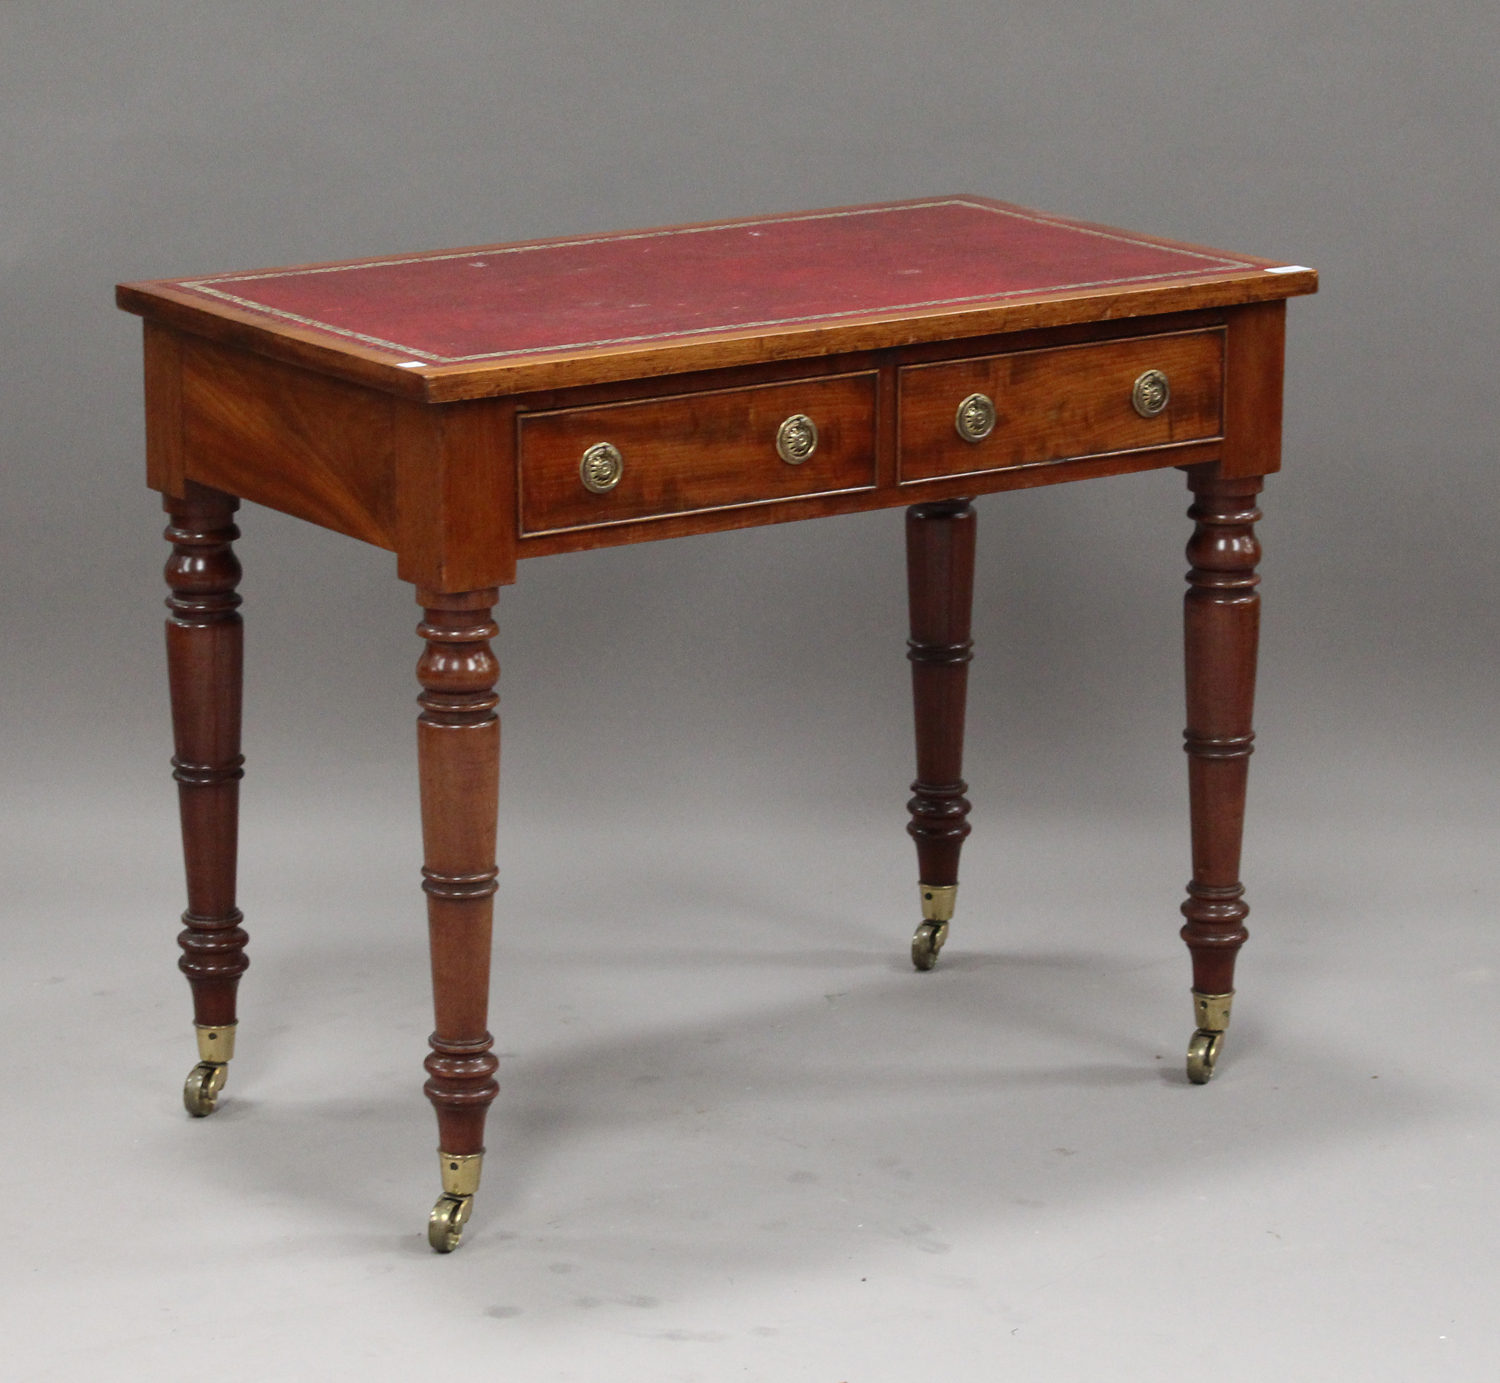 A Victorian mahogany writing table, the top inset with gilt-tooled red leather above two drawers, on